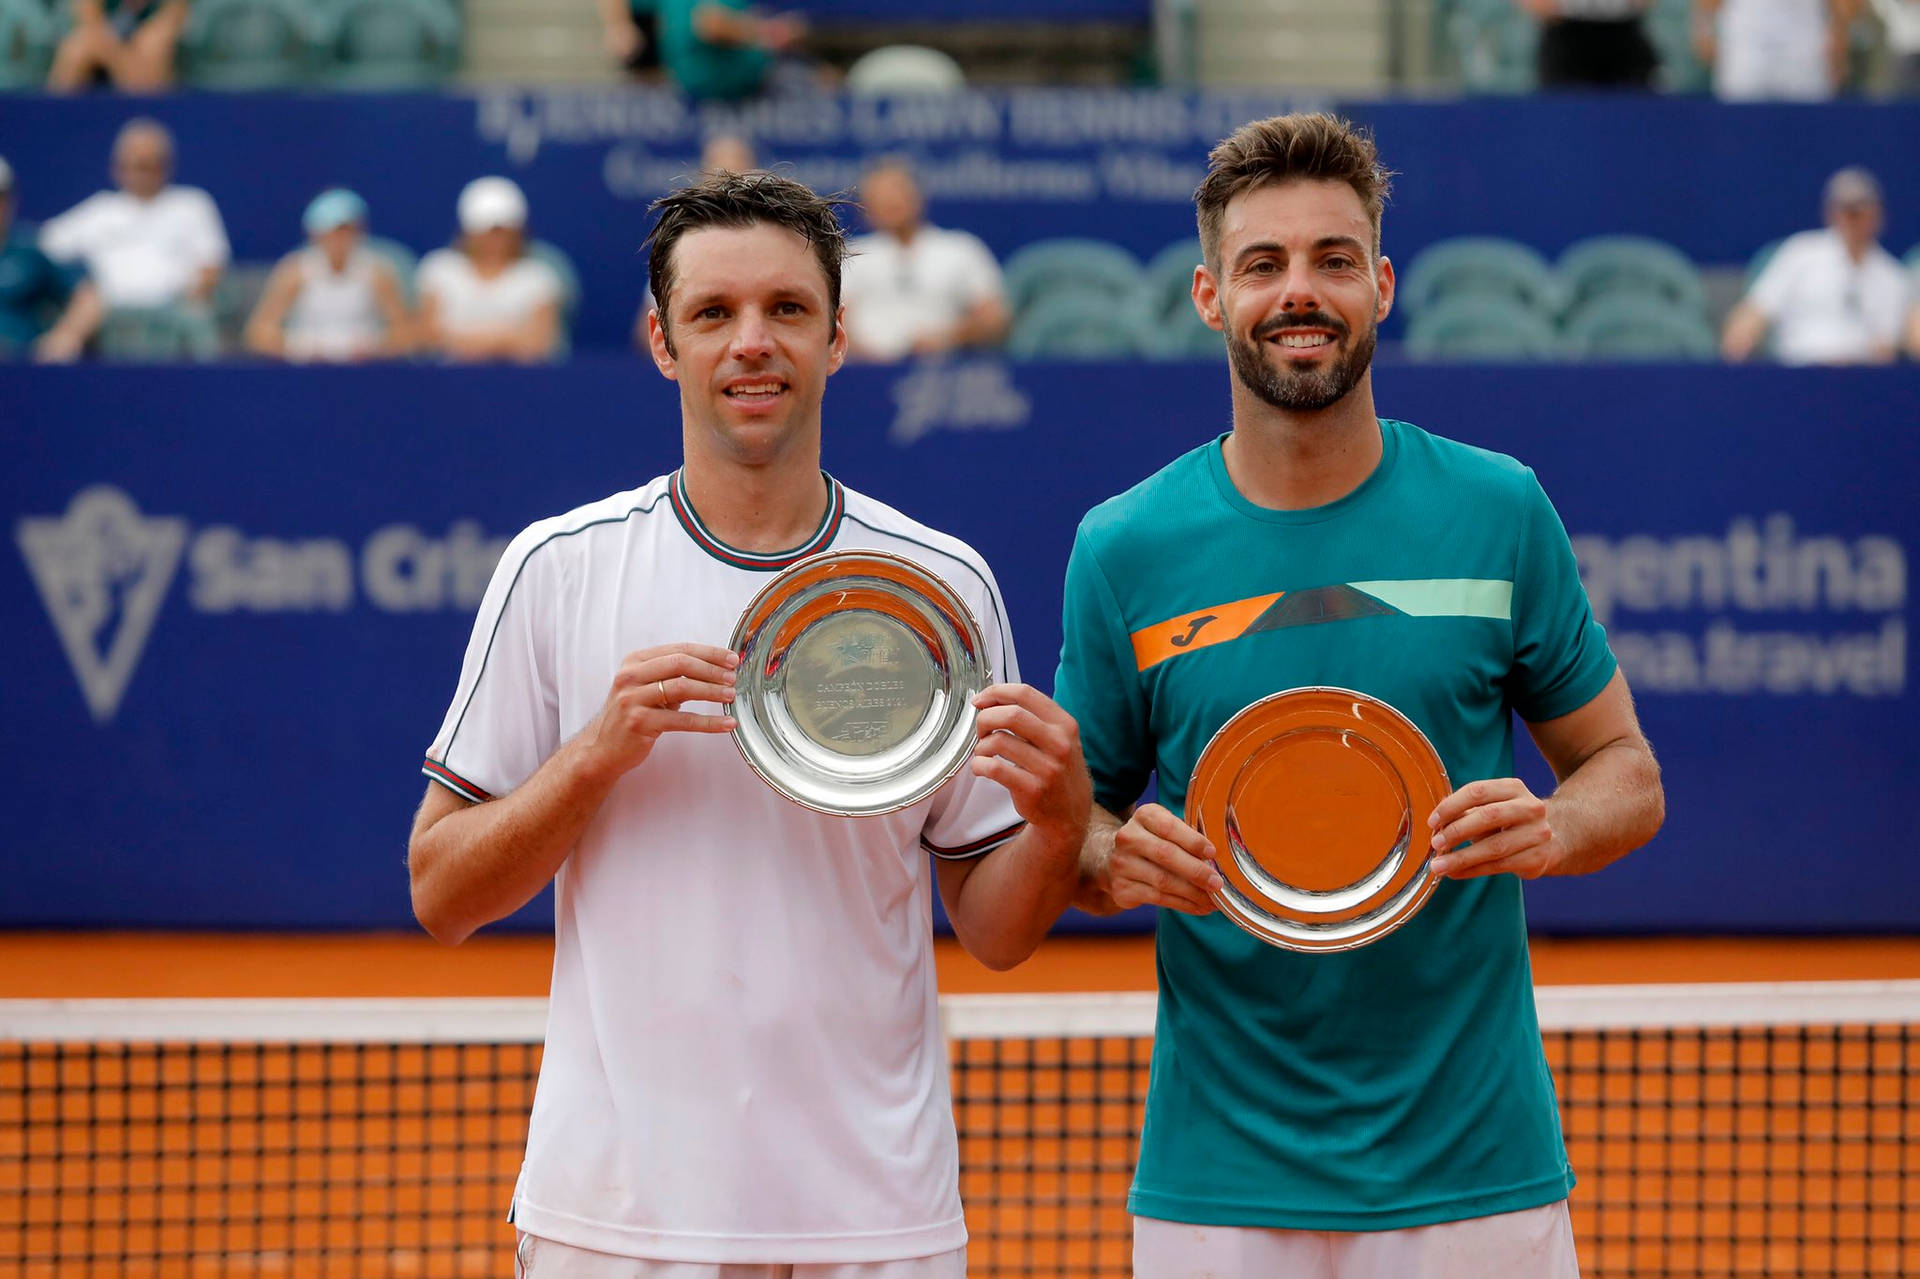 Marcel Granollers And Horacio Zeballos With Trophies Wallpaper